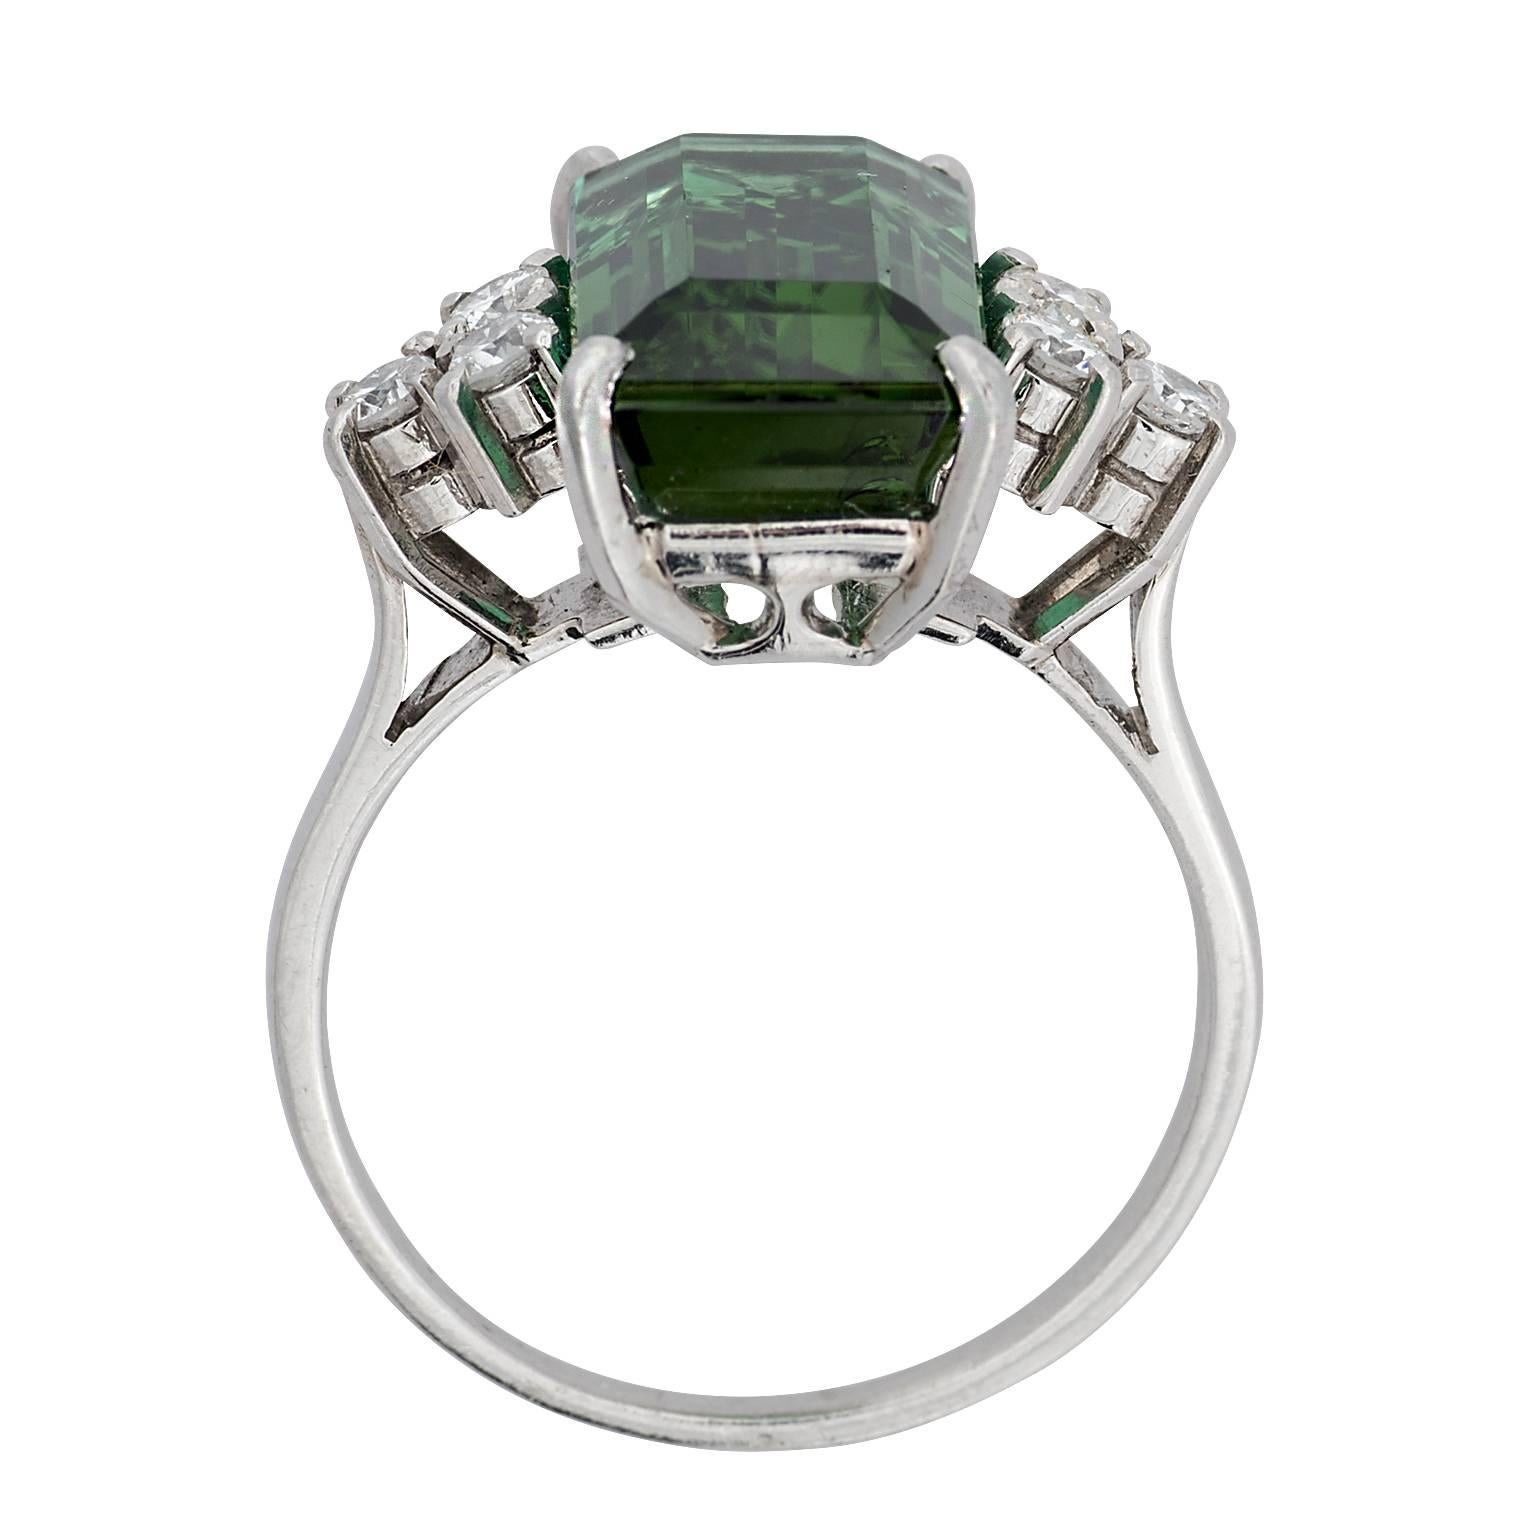 4.02 carat emerald cut green tourmaline and round brilliant diamond platinum ring.  There are six round brilliant diamonds totaling 0.24 carats.  The tourmaline is set in a four prong basket.

**Currently a finger size 7.25